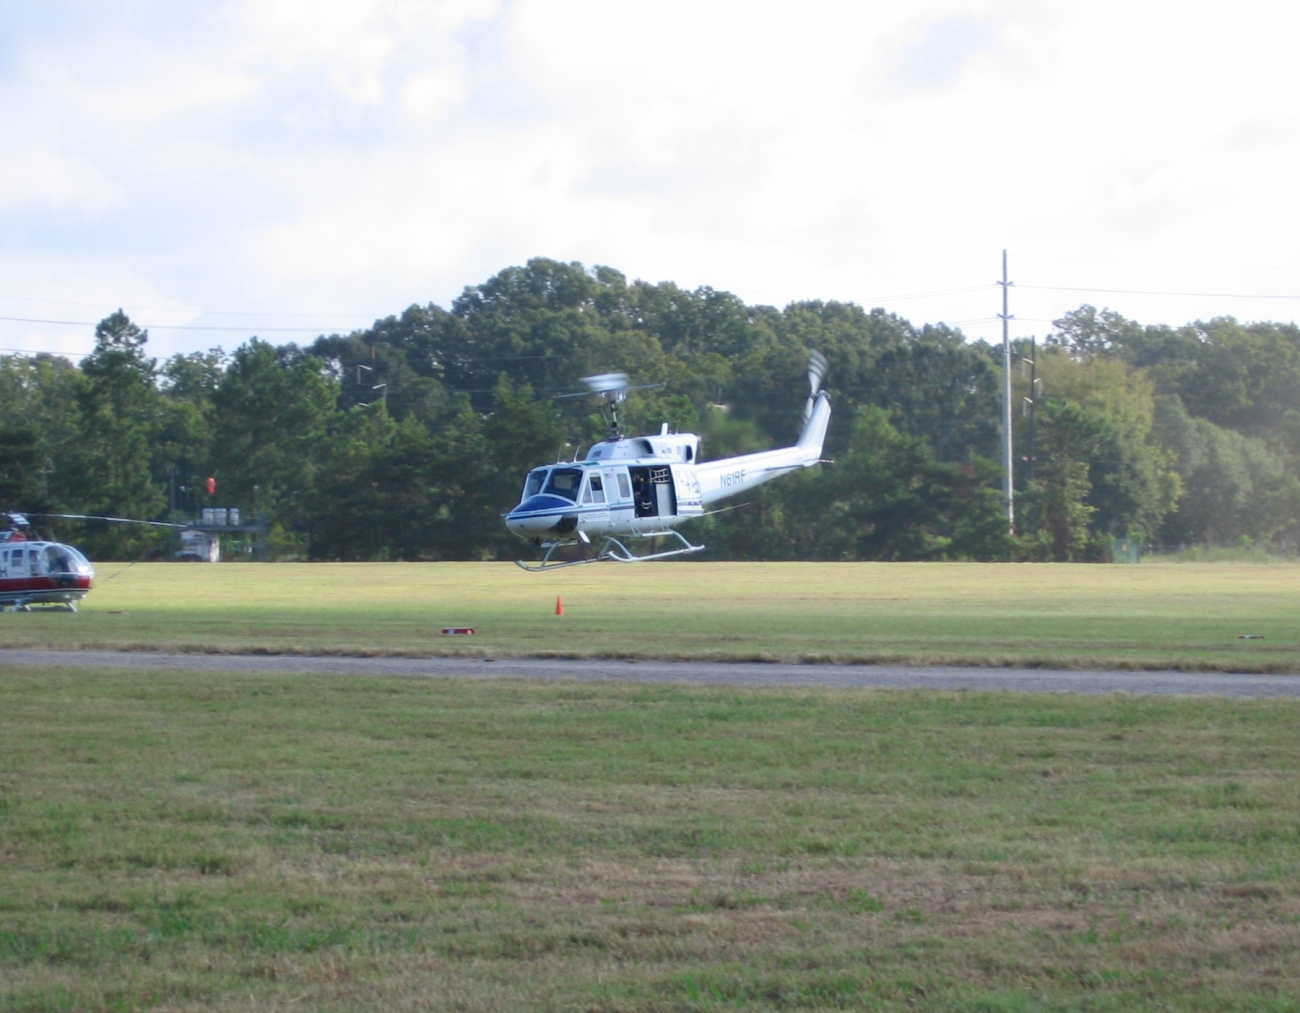 NOAA 61 working with contractor helicopters out of a makeshift heliportnorth of Baton Rouge